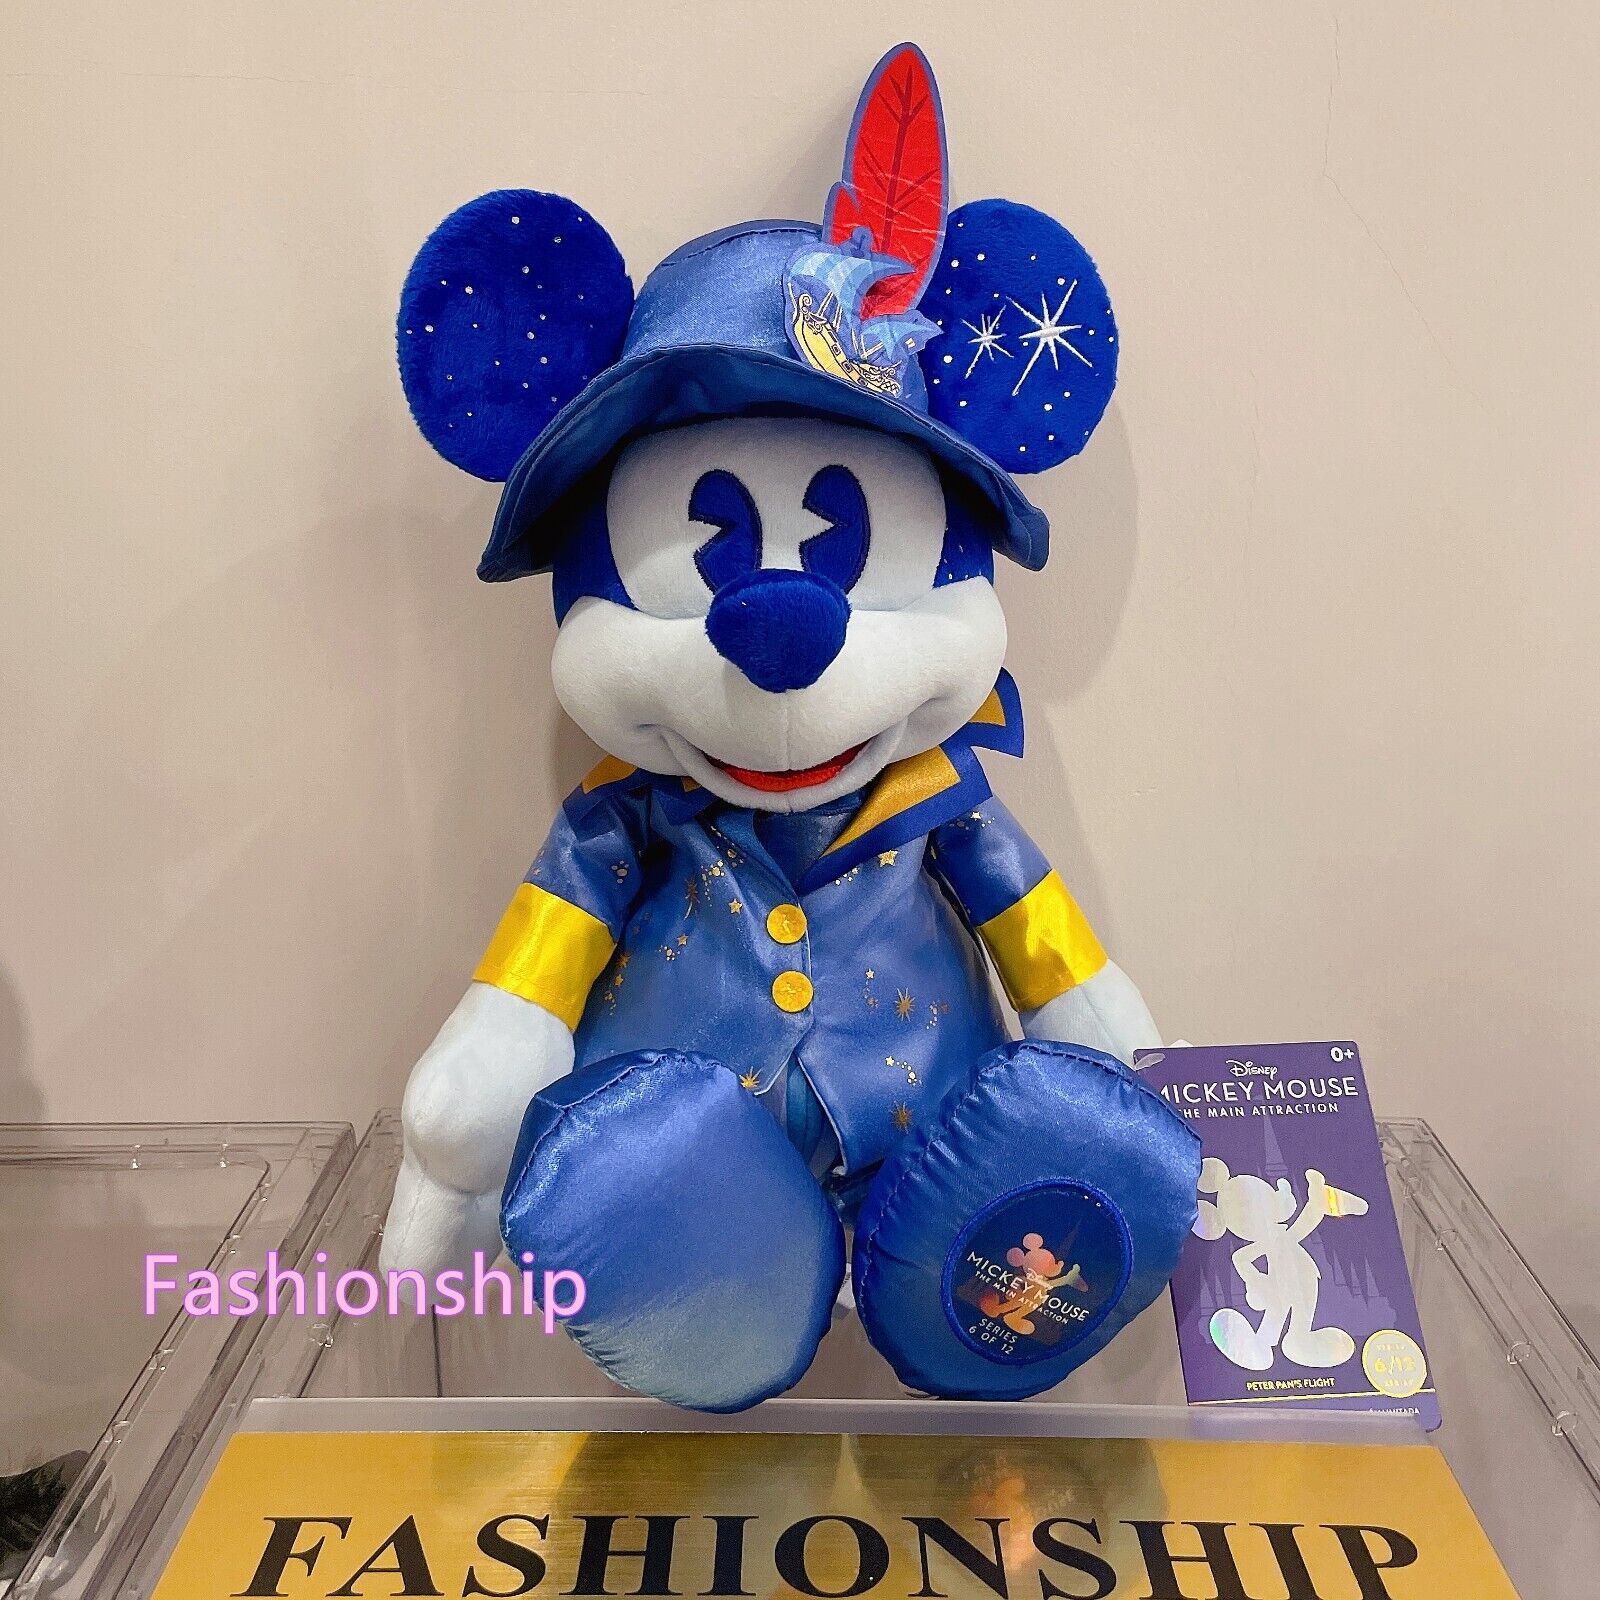 Disney store Shanghai Mickey mouse the main attraction June Plush Peter Pan 6/12